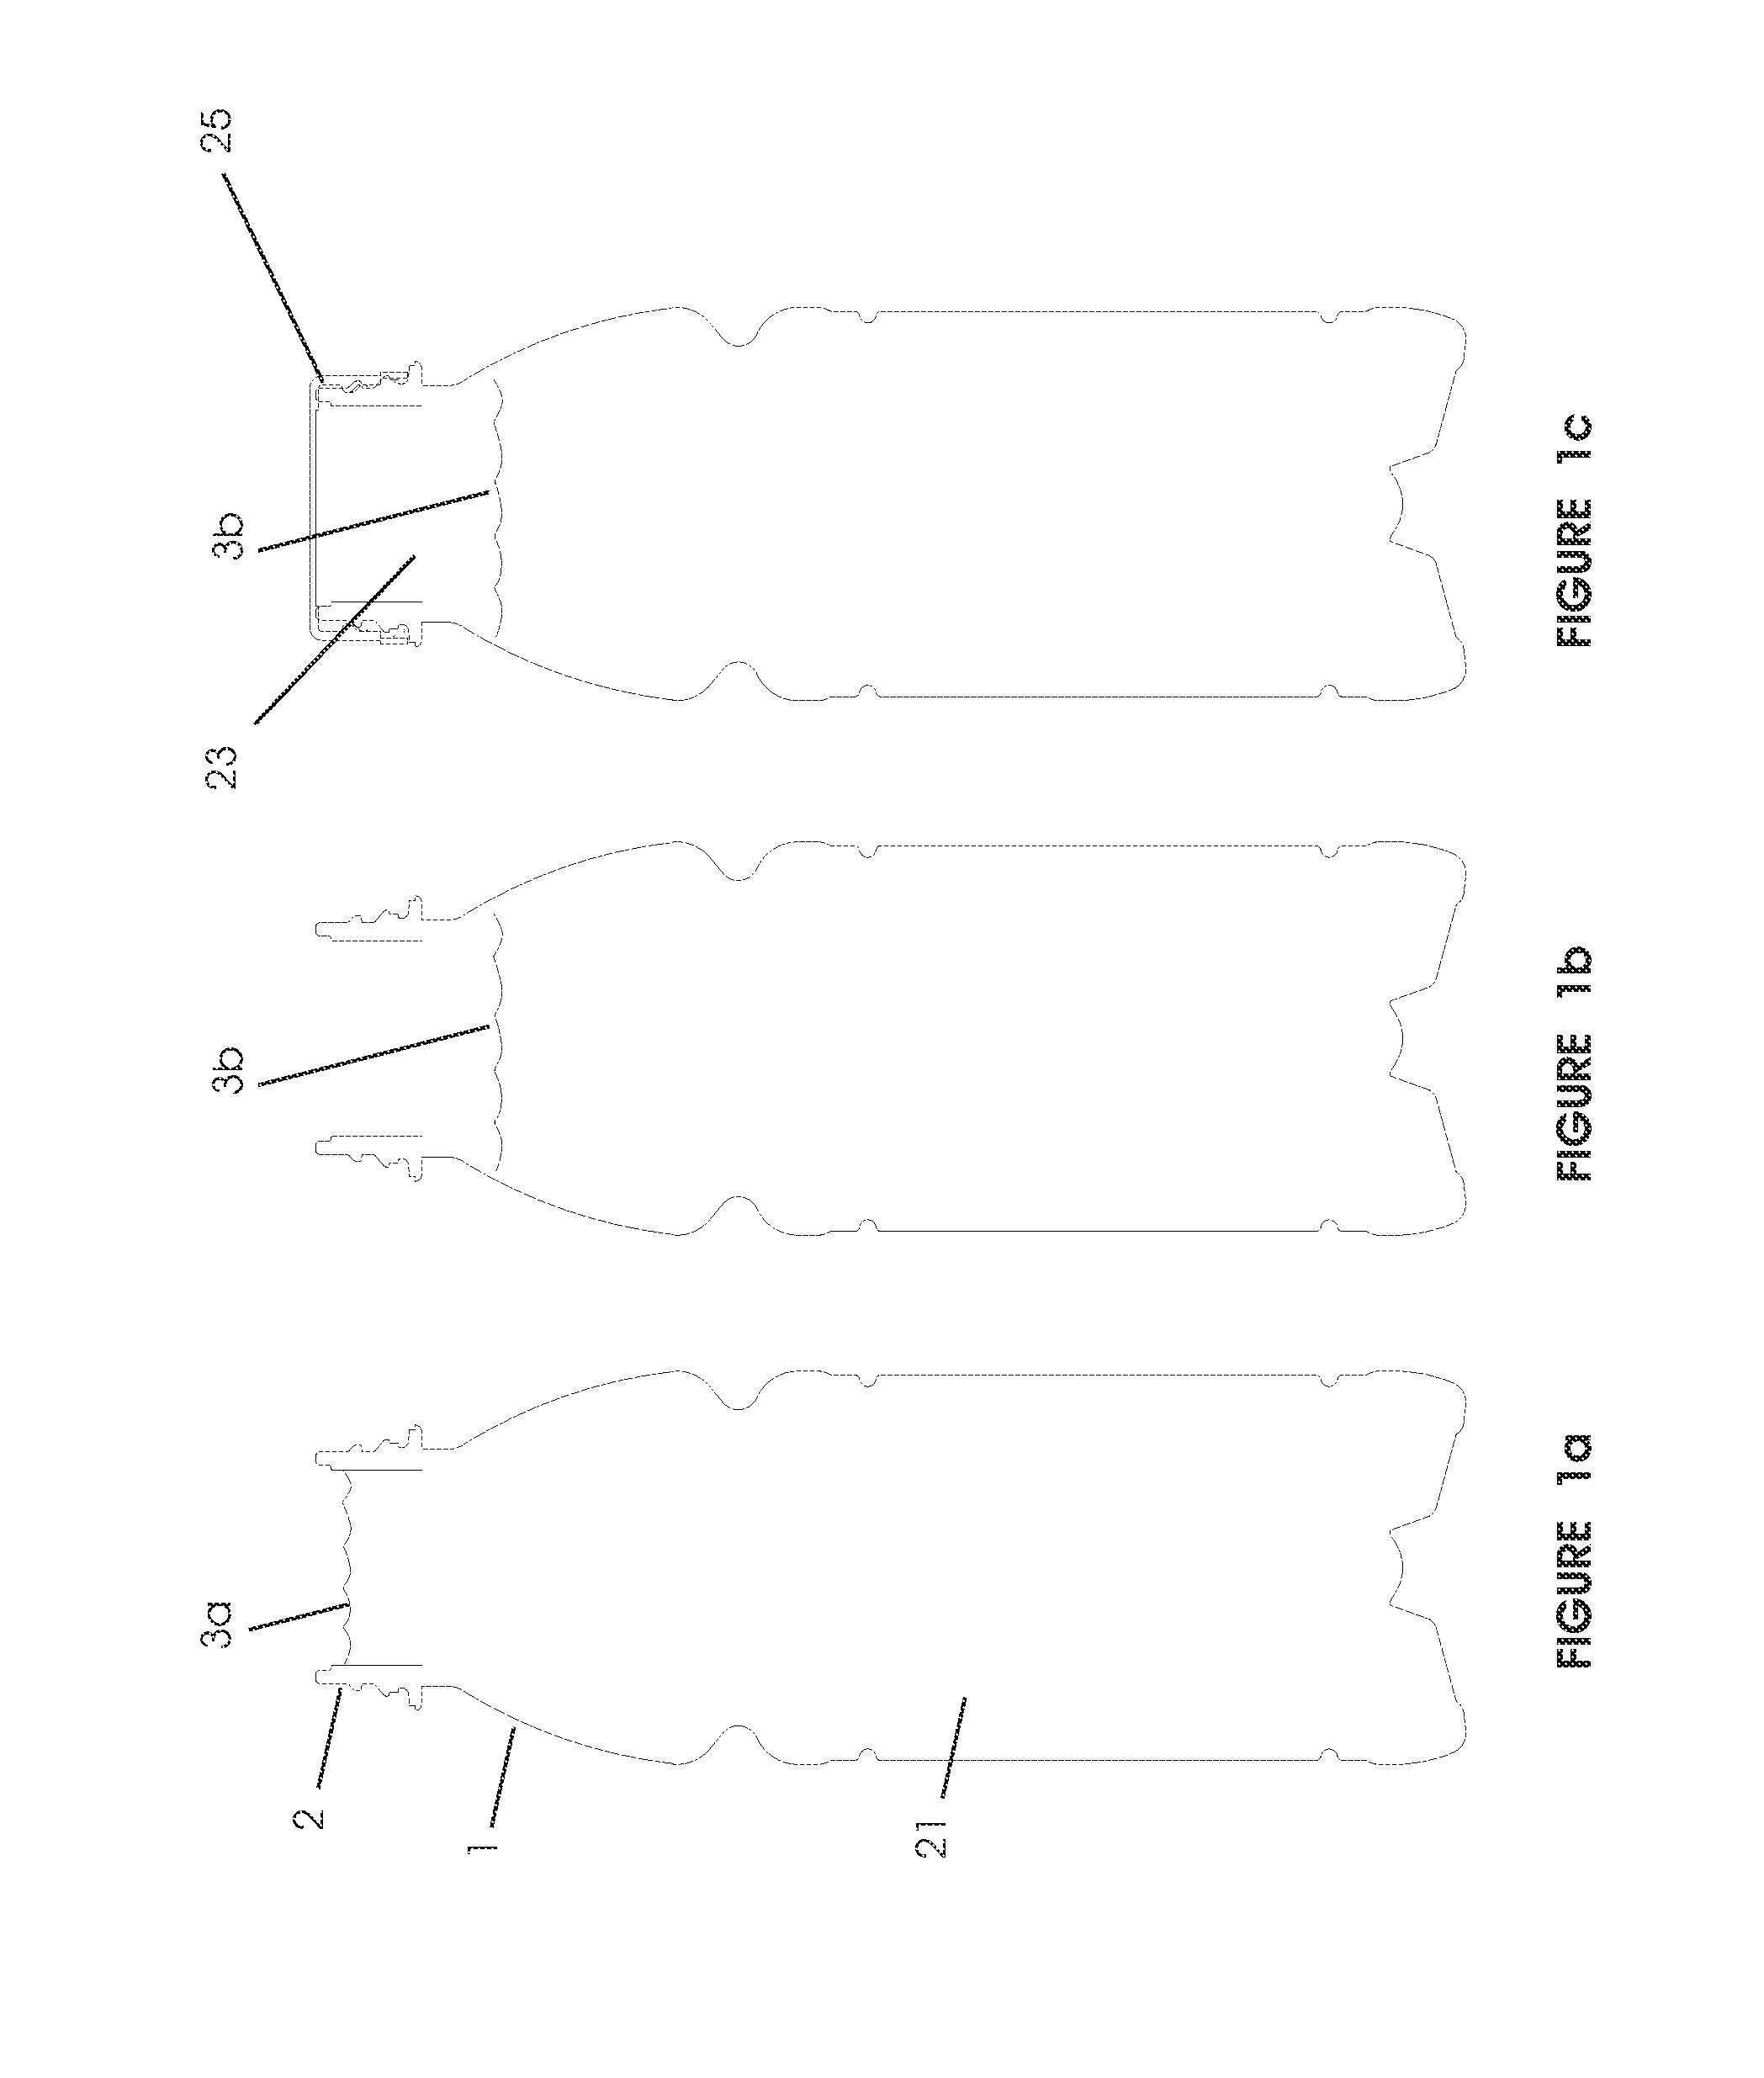 Headspace sealing and displacement method for removal of vacuum pressure